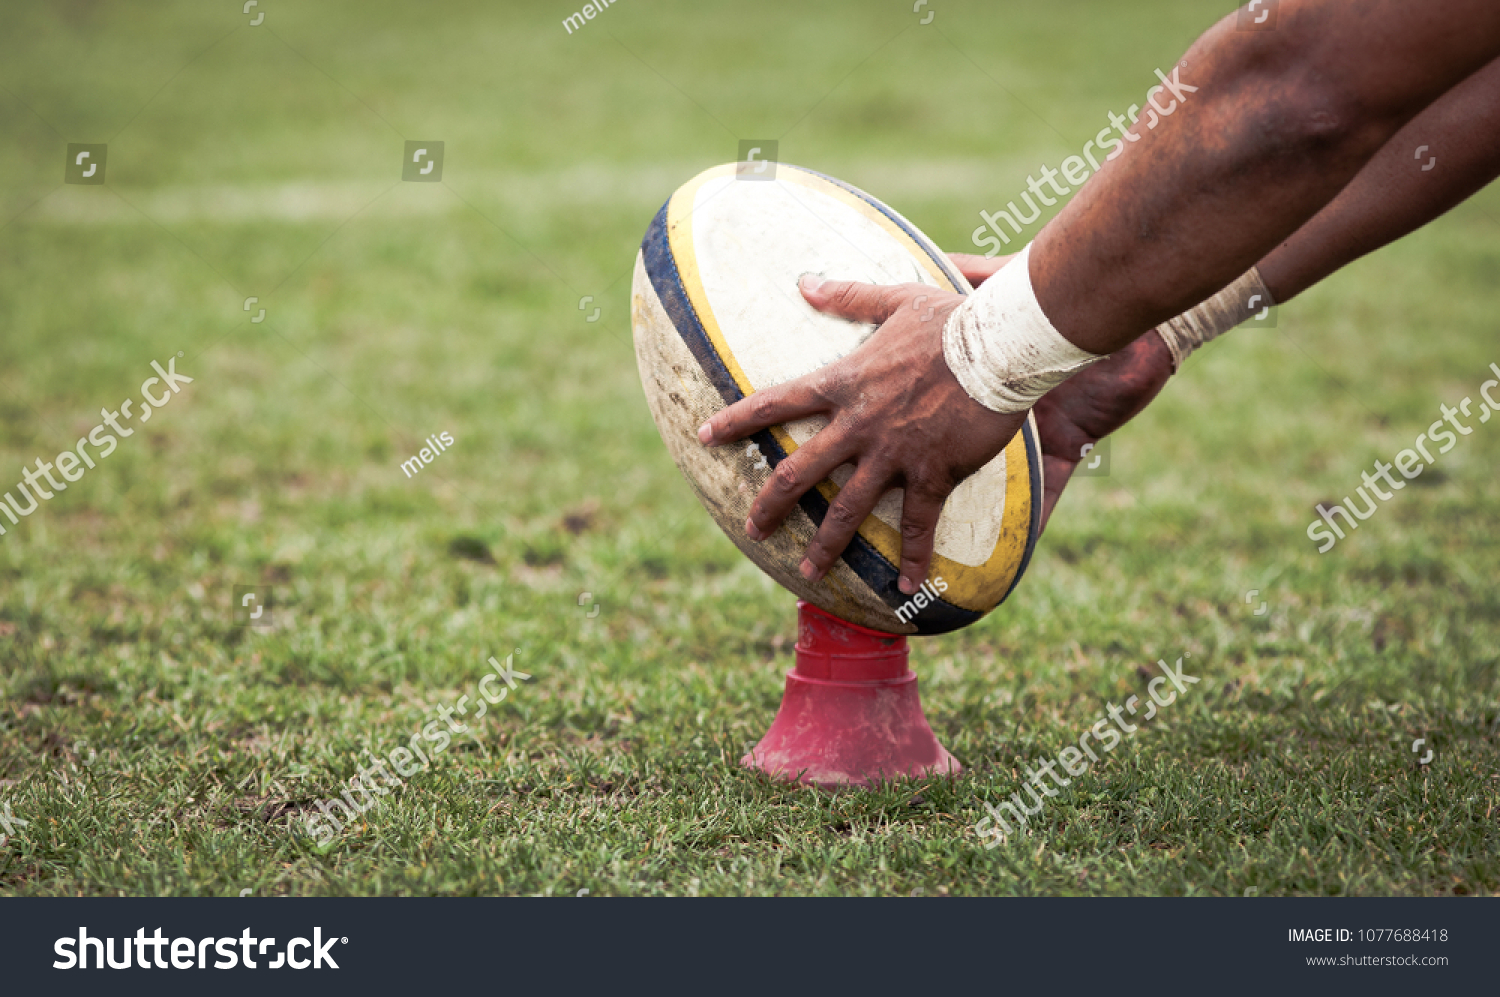 rugby player preparing to kick the oval ball during game #1077688418